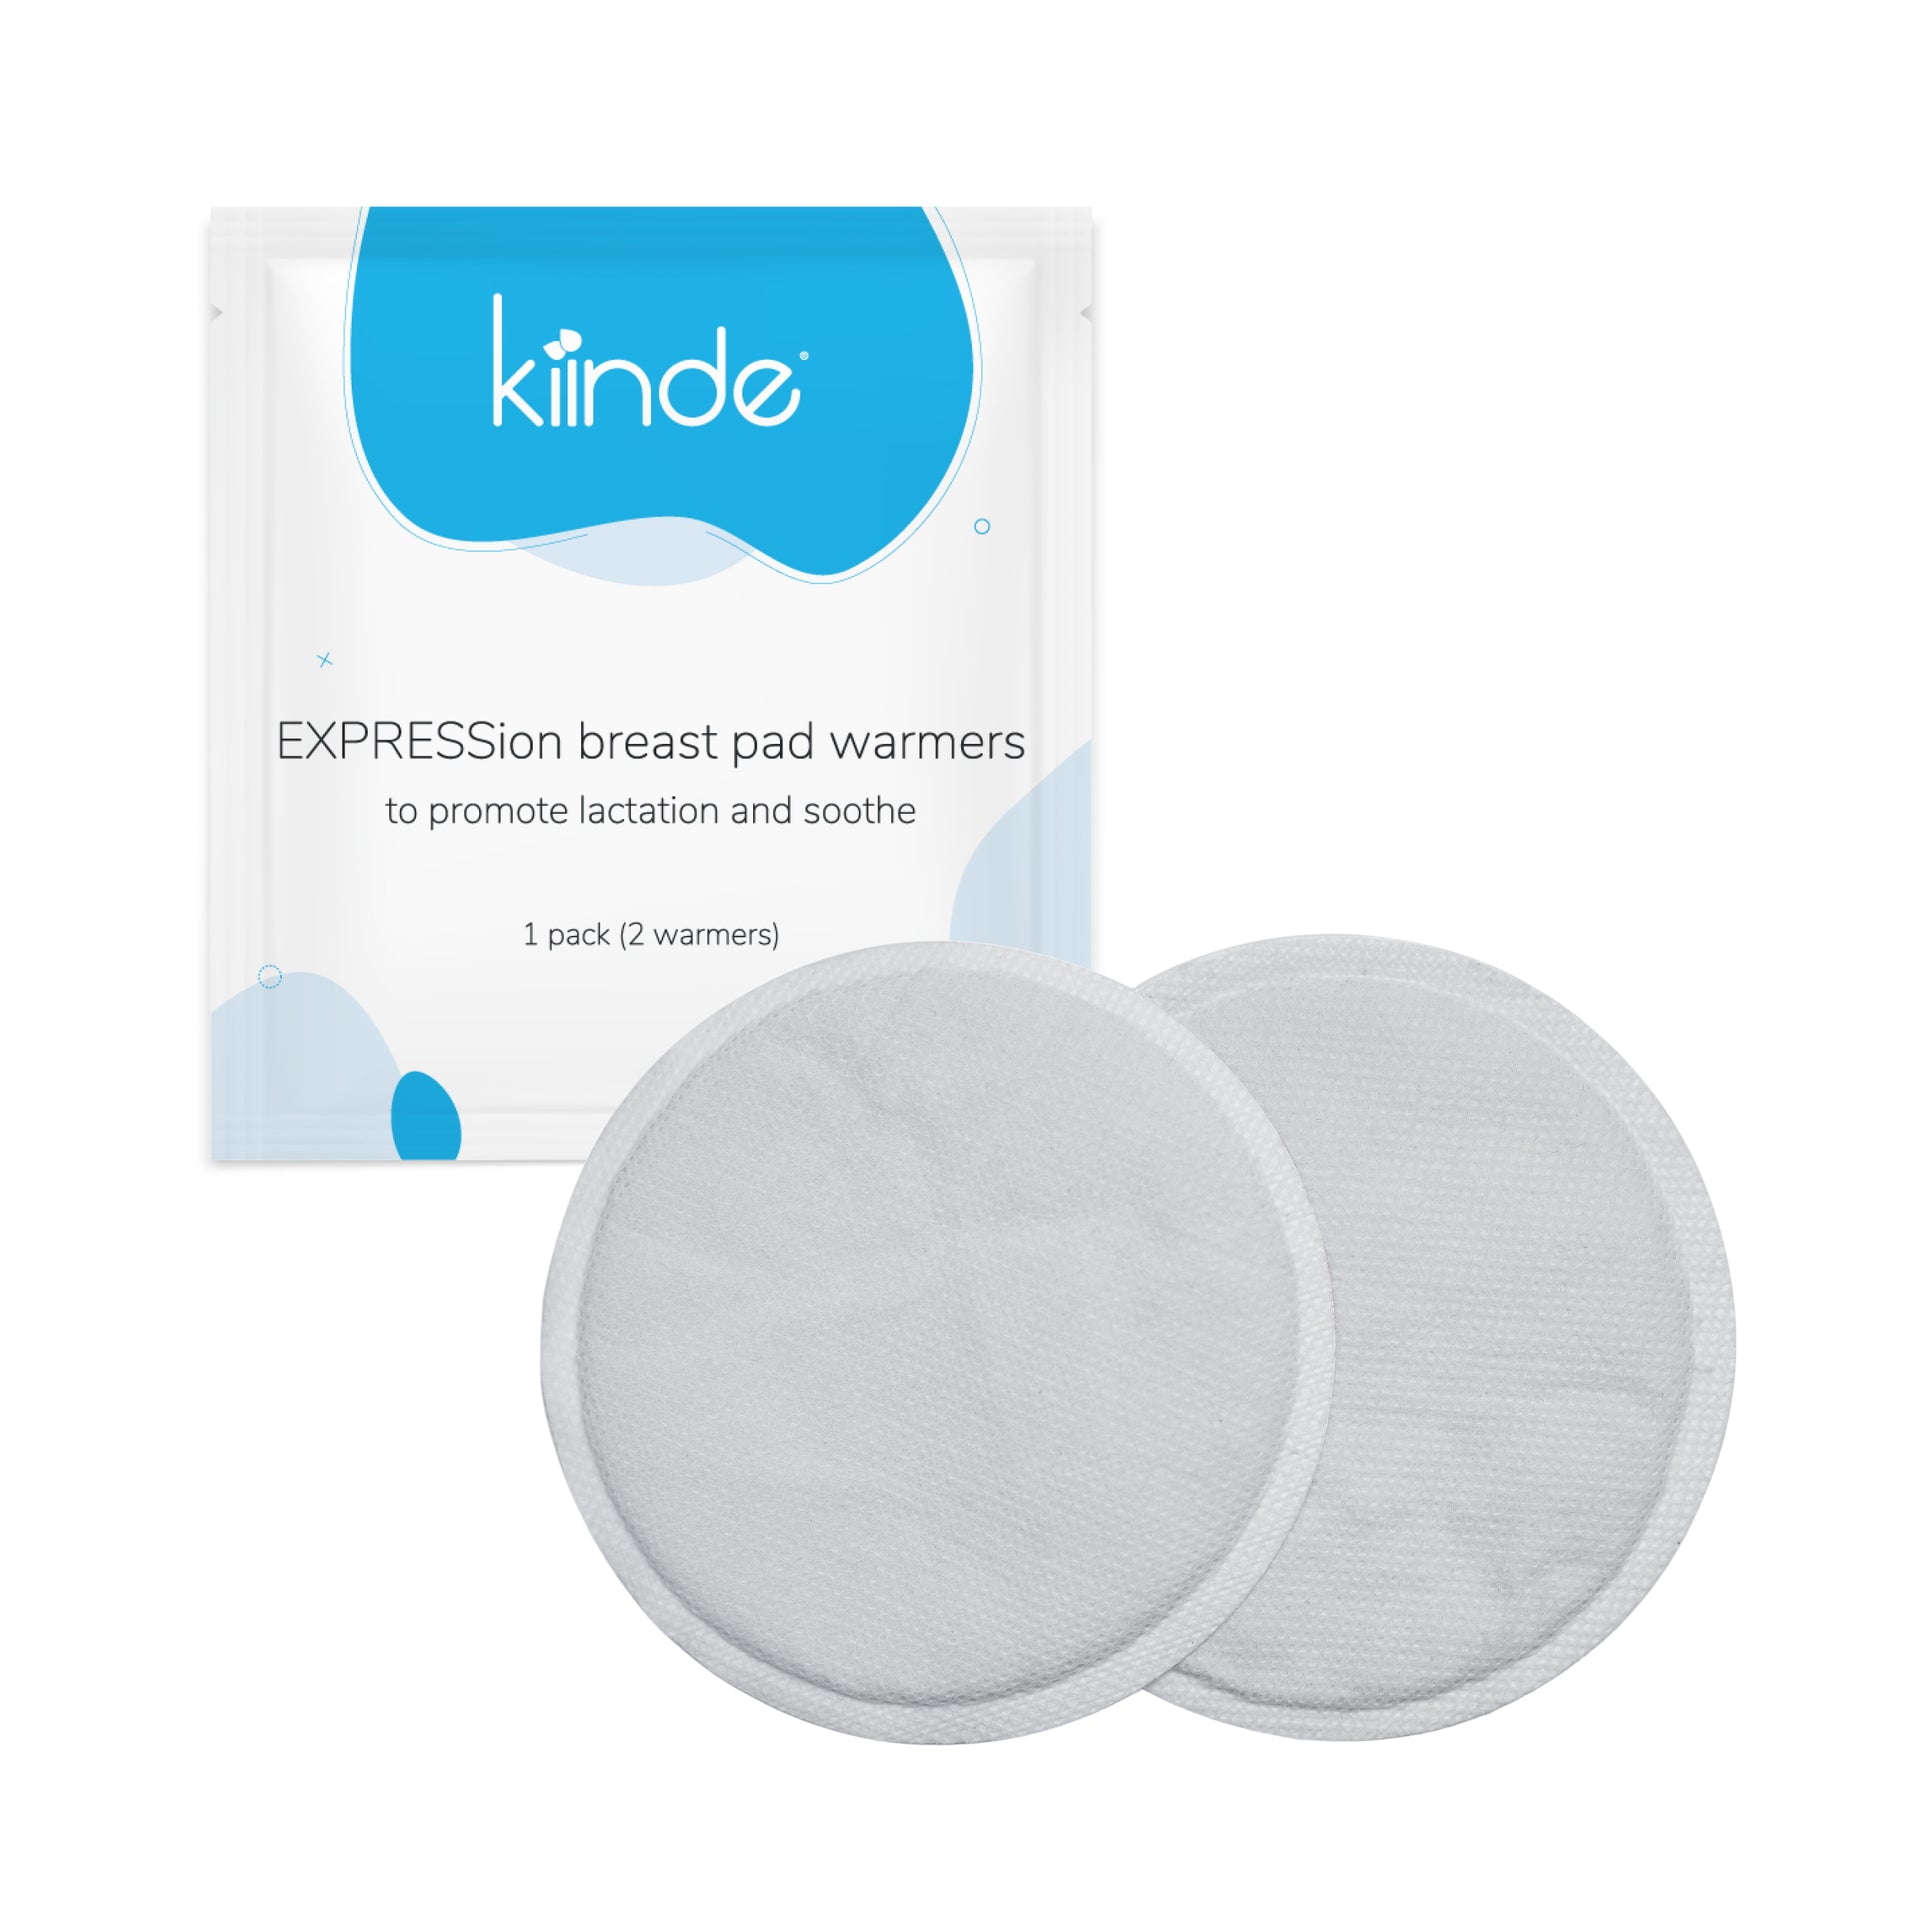 Pariday TendHer Reusable Soothing Breastfeeding Gel Pads with Absorbent Covers, Hot or Cold Packs for Nursing Pain Relief from Sore